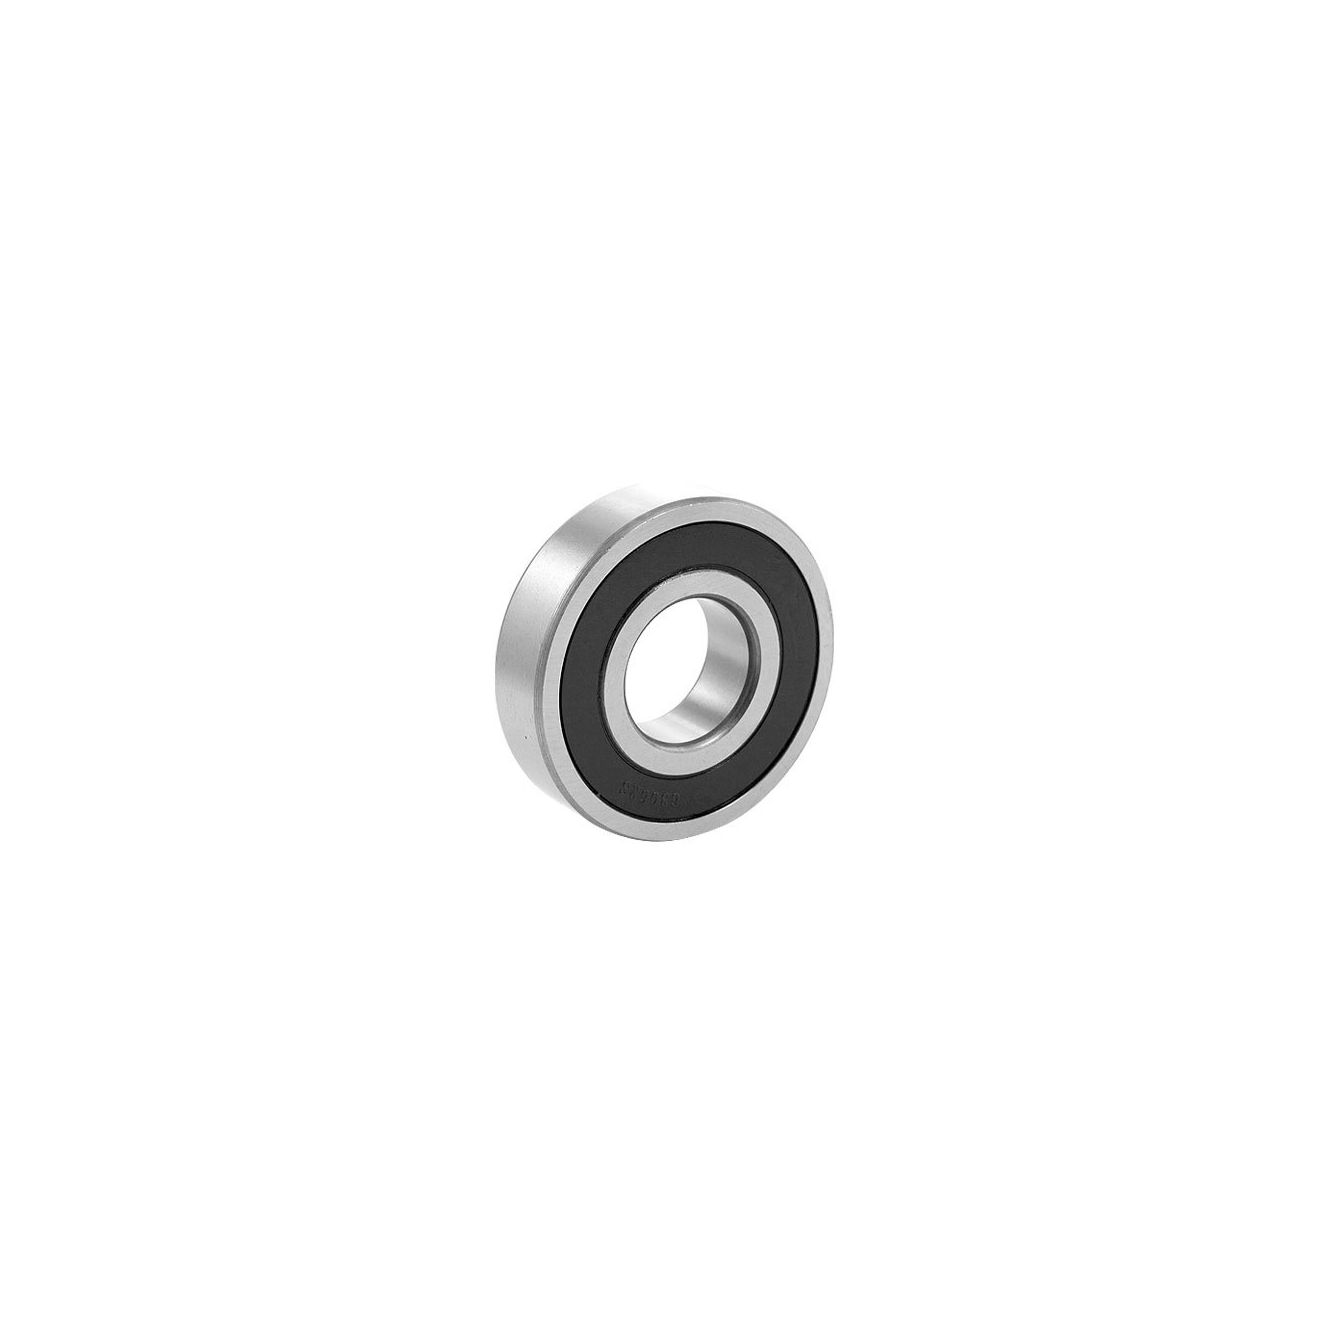 BEARING OPTIONS MINIATURE BEARING 687 2RS STAINLESS STEEL 7MM X 14MM X 5MM 